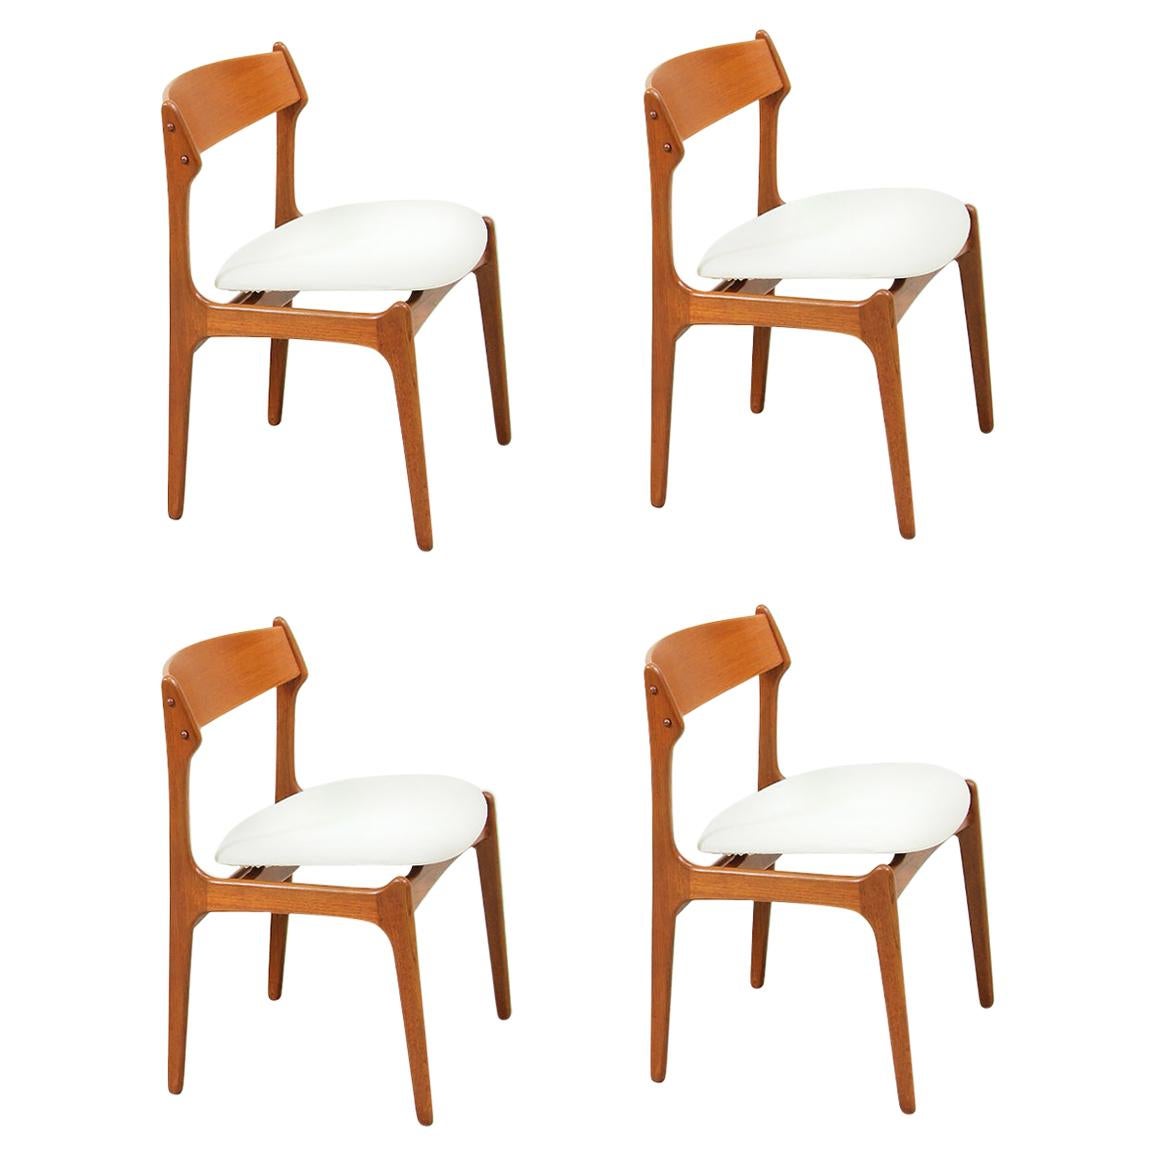 Erick Buch Teak and Leather Dining Chairs for O.D. Møbler